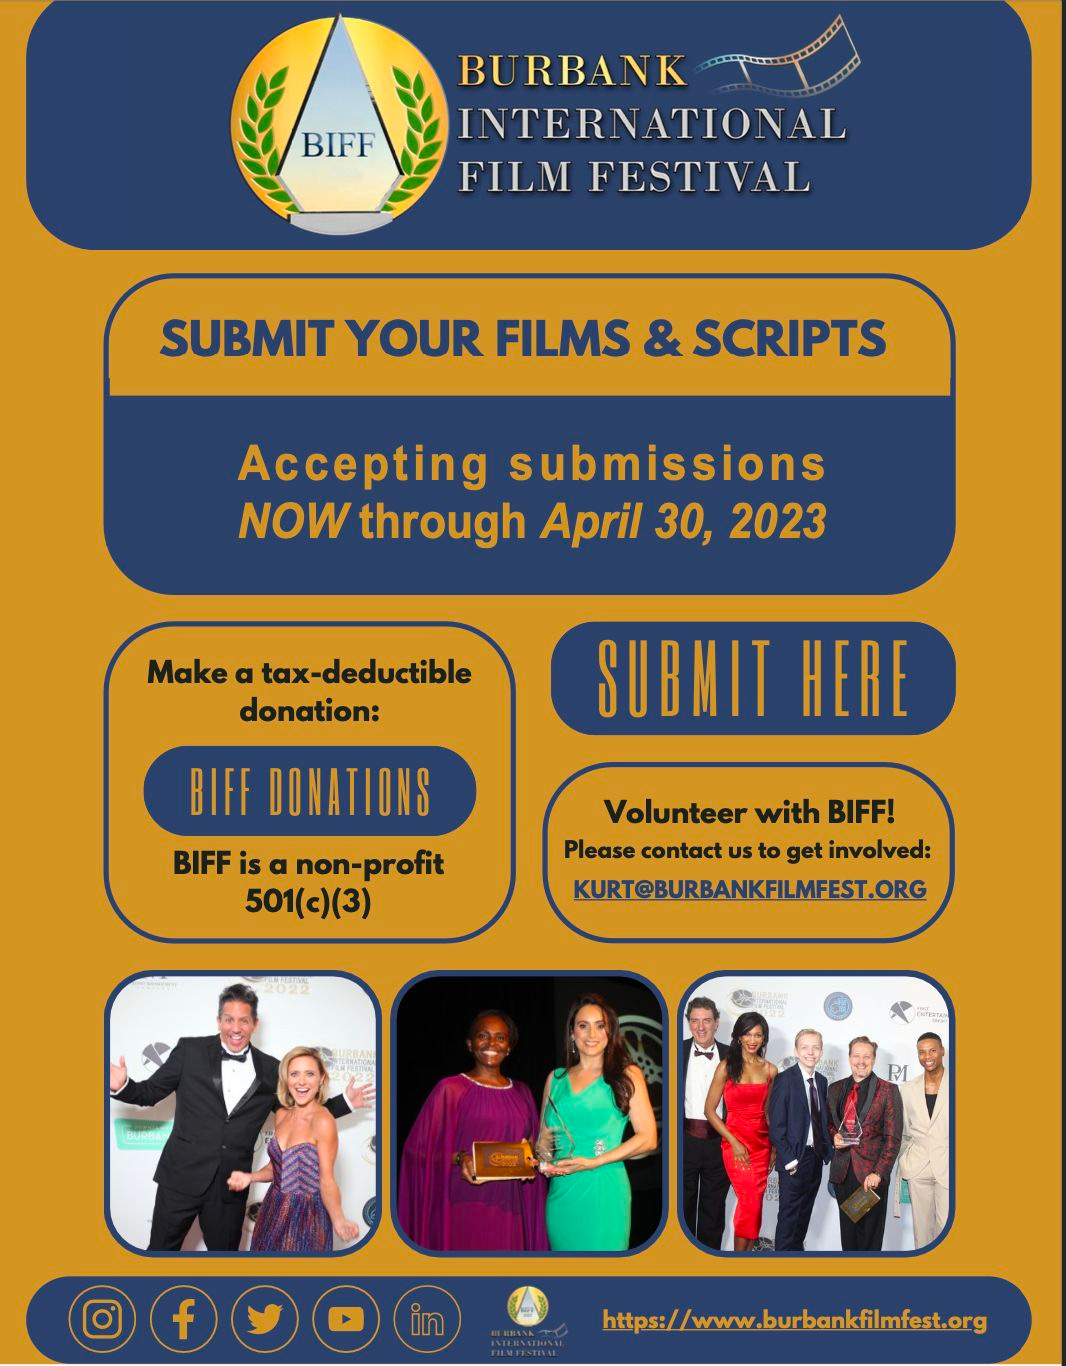 May be an image of 9 people, people standing and text that says 'BIFF BU RBANK INTERNATIONAL FILM FESTIVAL SUBMIT YOUR FILMS & SCRIPTS Accepting submissions NOW through April 30, 2023 Make a tax-deductible donation: SUBMIT HERE BIFF DONATIONS BIFF is a non-profit 501(c)(3) Volunteer with BIFF! Please contact US to get involved: KURT@BURBANKFILMFEST.ORG 世牌 f https://www.burbankilmfest.org'